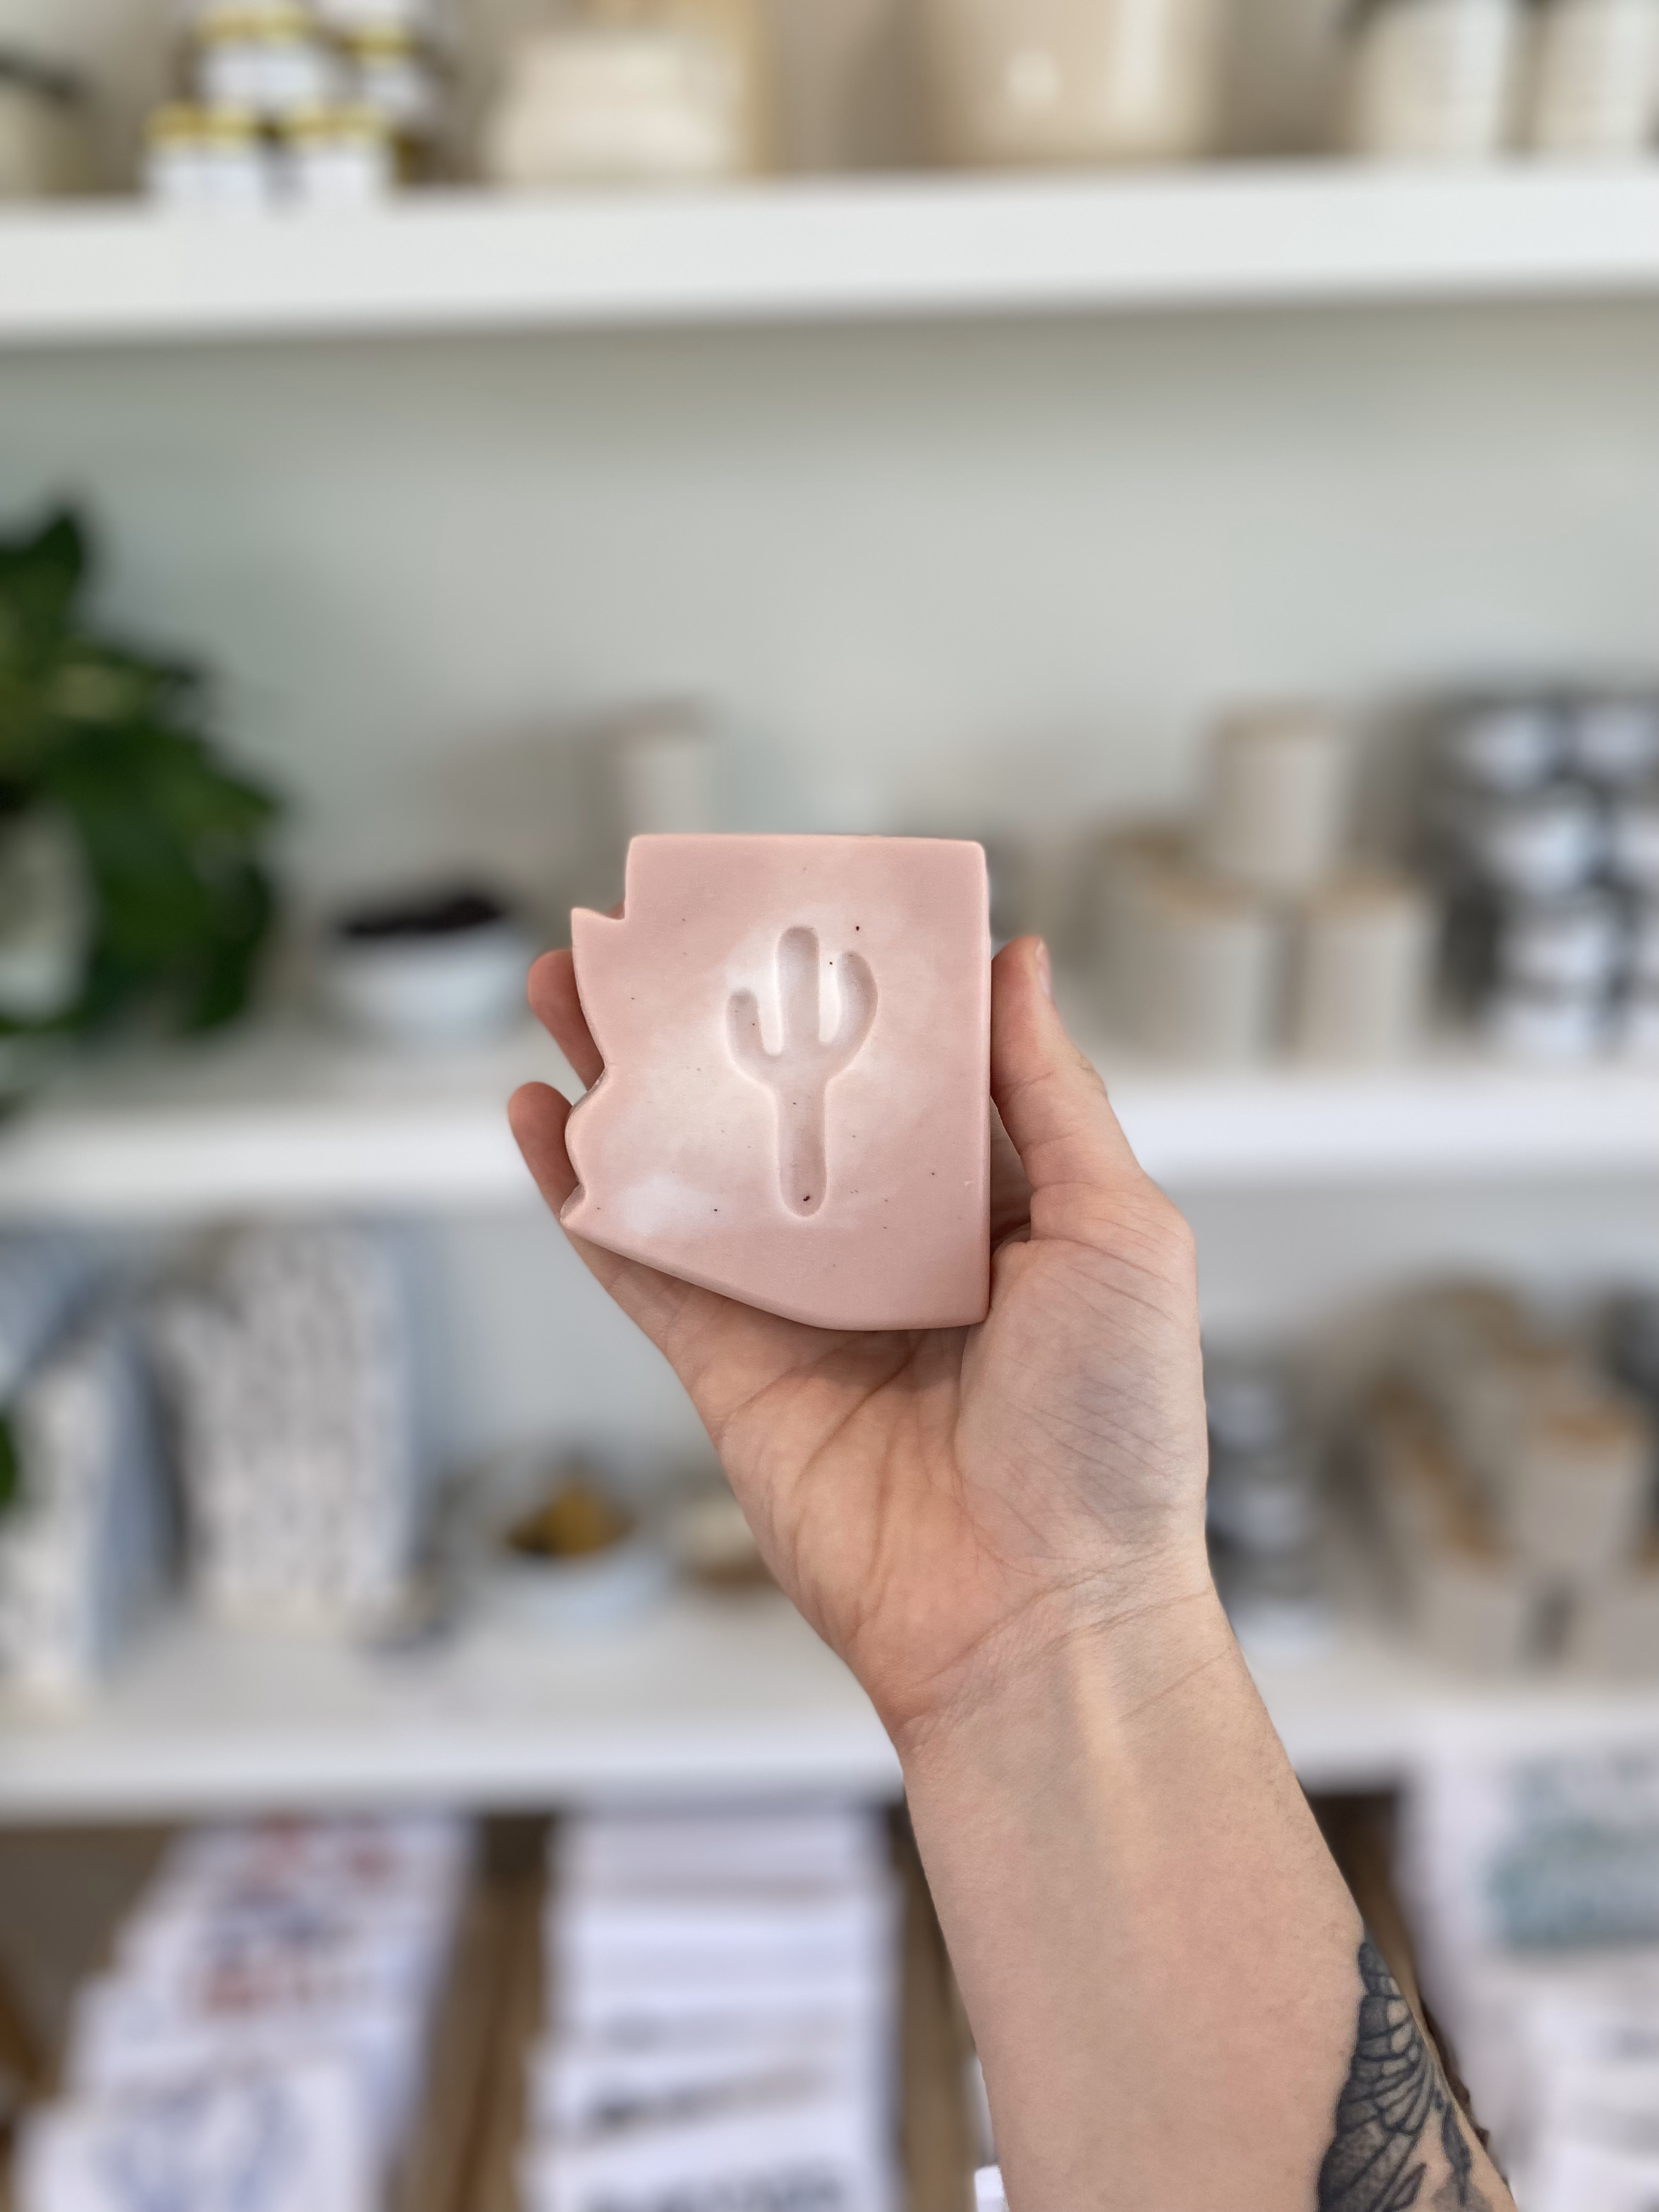 A woman's hand holding arizona shaped soap in front of shelves